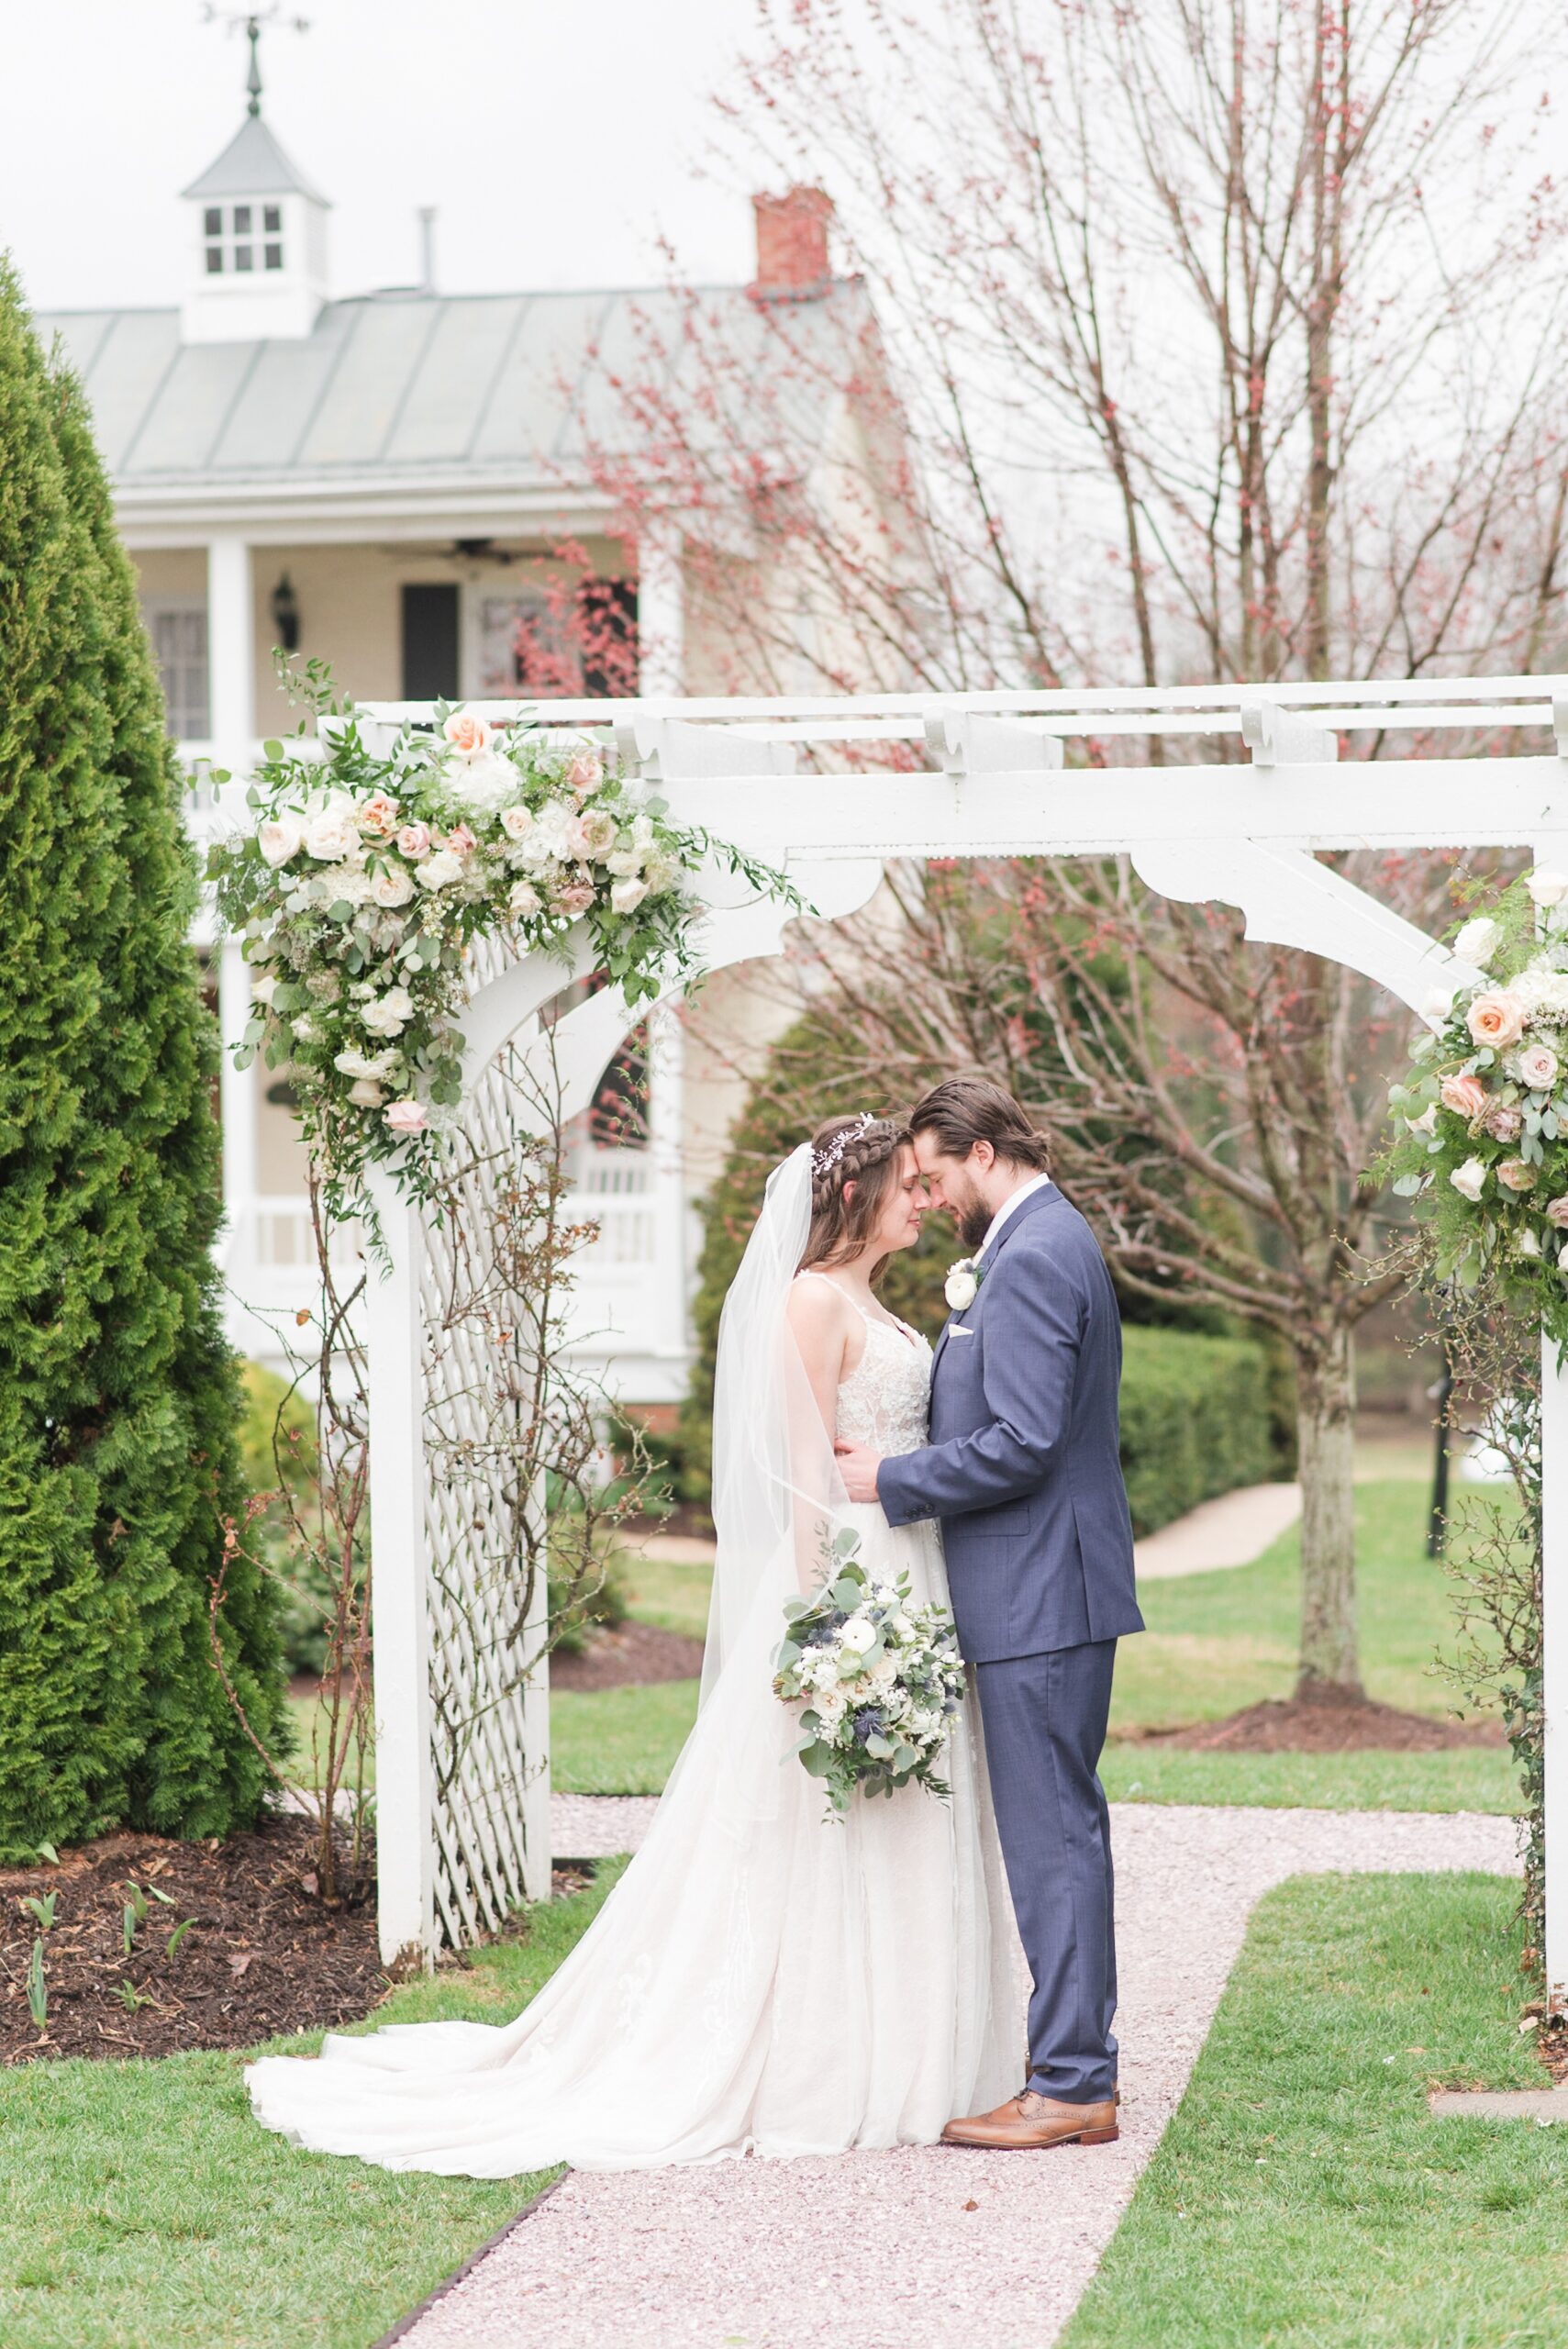 Newlyweds touch foreheads while standing under a white pergola